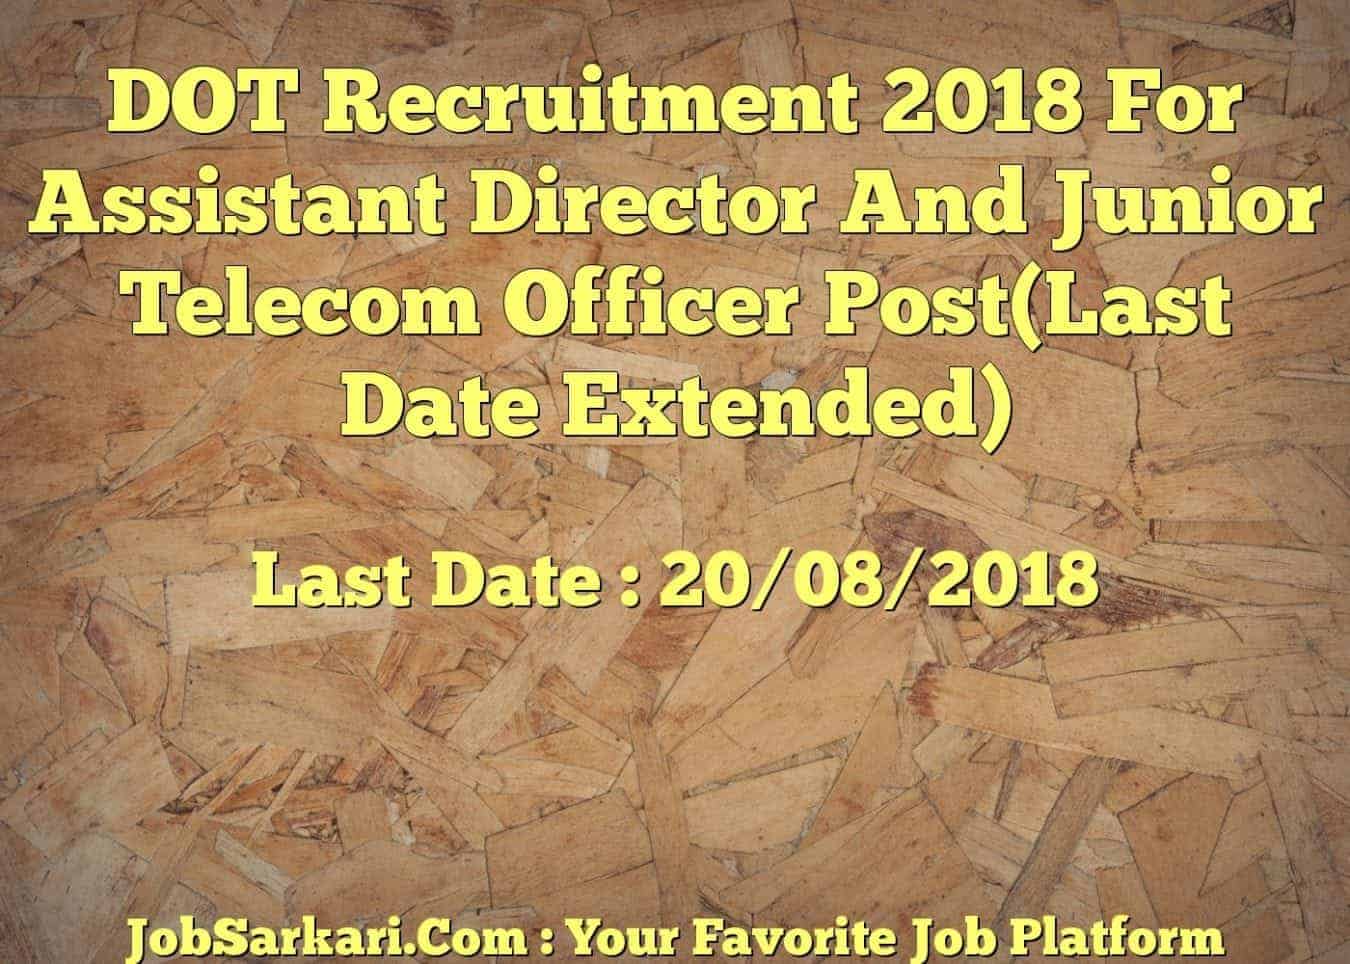 DOT Recruitment 2018 For Assistant Director And Junior Telecom Officer Post(Last Date Extended)